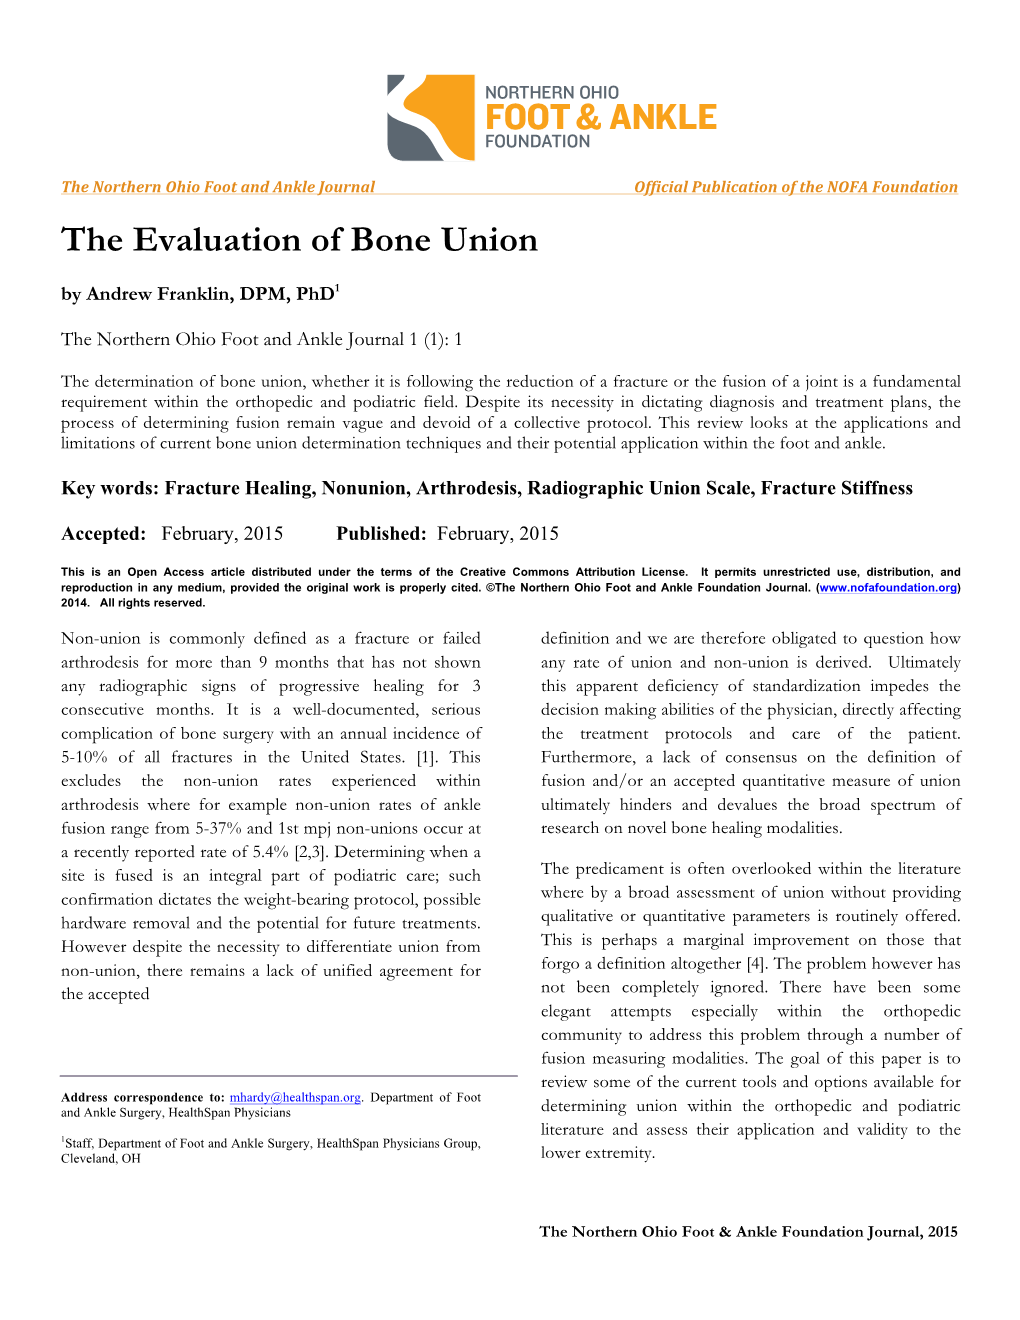 The Evaluation of Bone Union by Andrew Franklin, DPM, Phd1